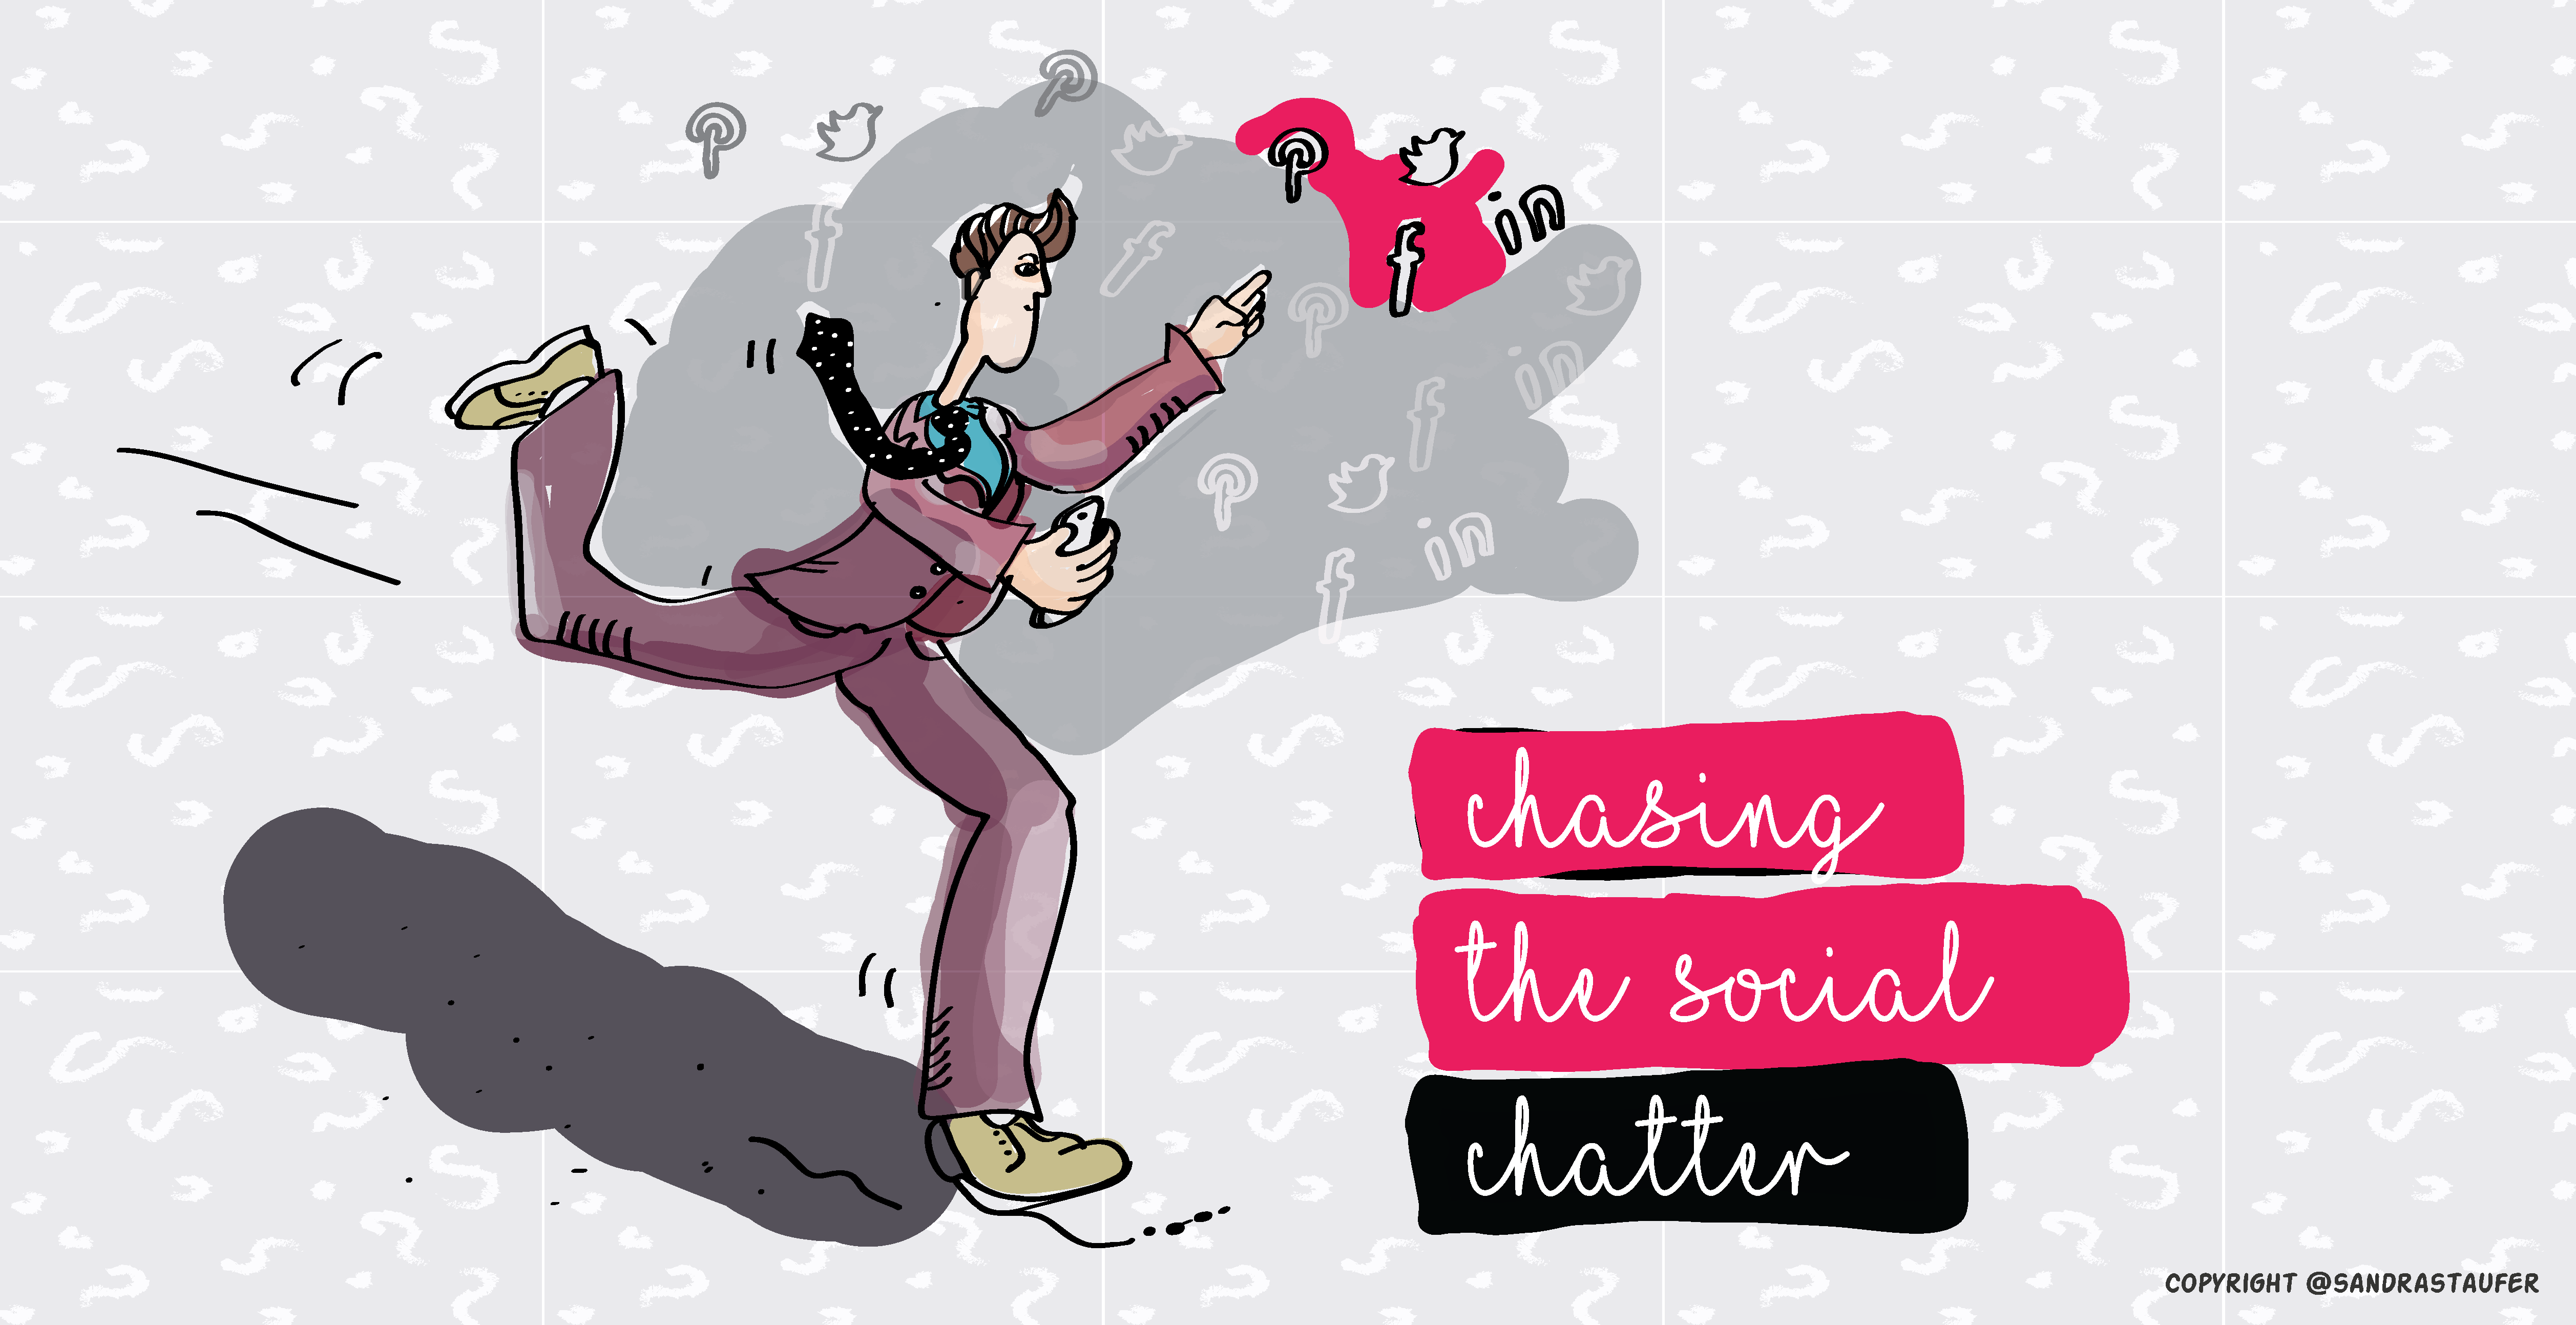 'CHASING THE SOCIAL MEDIA CHATTER' KEEPING UP WITH THE NETWORKING FRENCY, ILLUSTRATION BY @SANDRASTAUFER